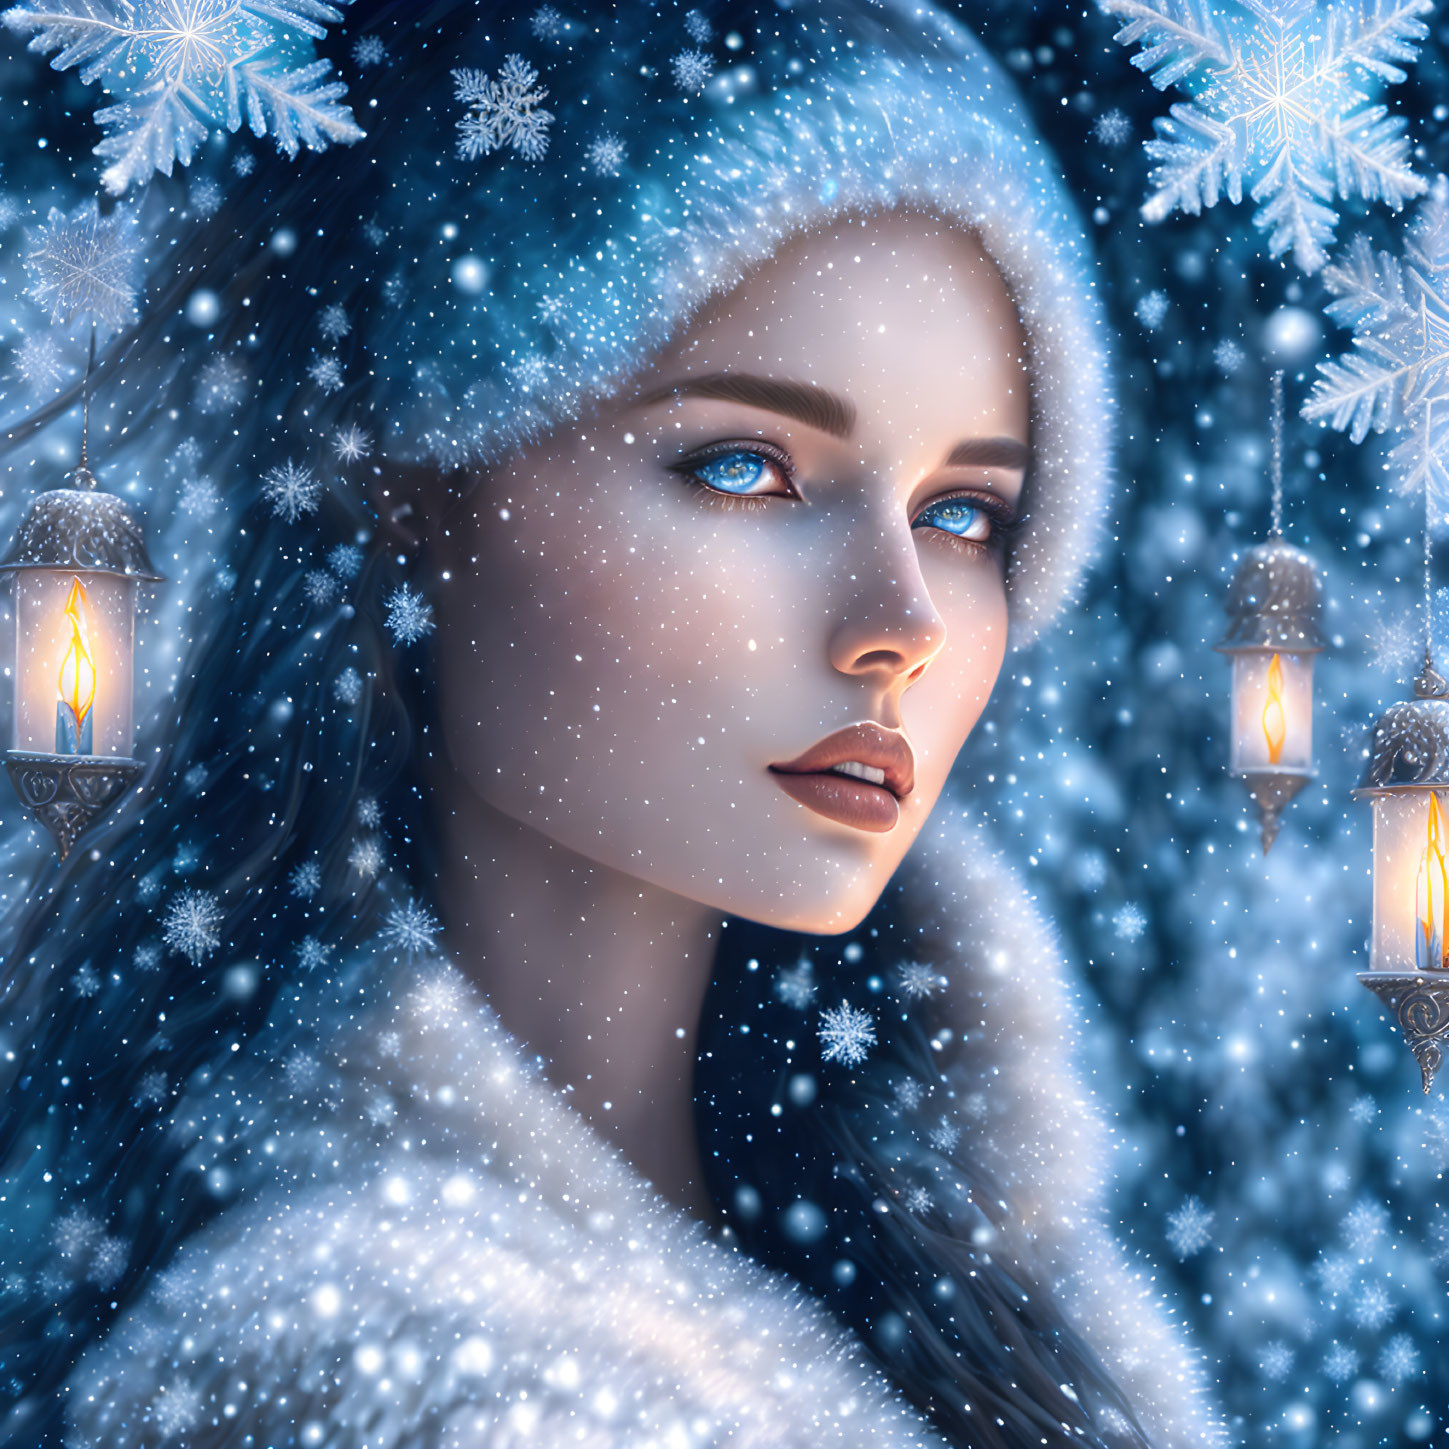 Portrait of Woman with Blue Eyes, Fur Hood, Snowflakes, and Lanterns in Winter